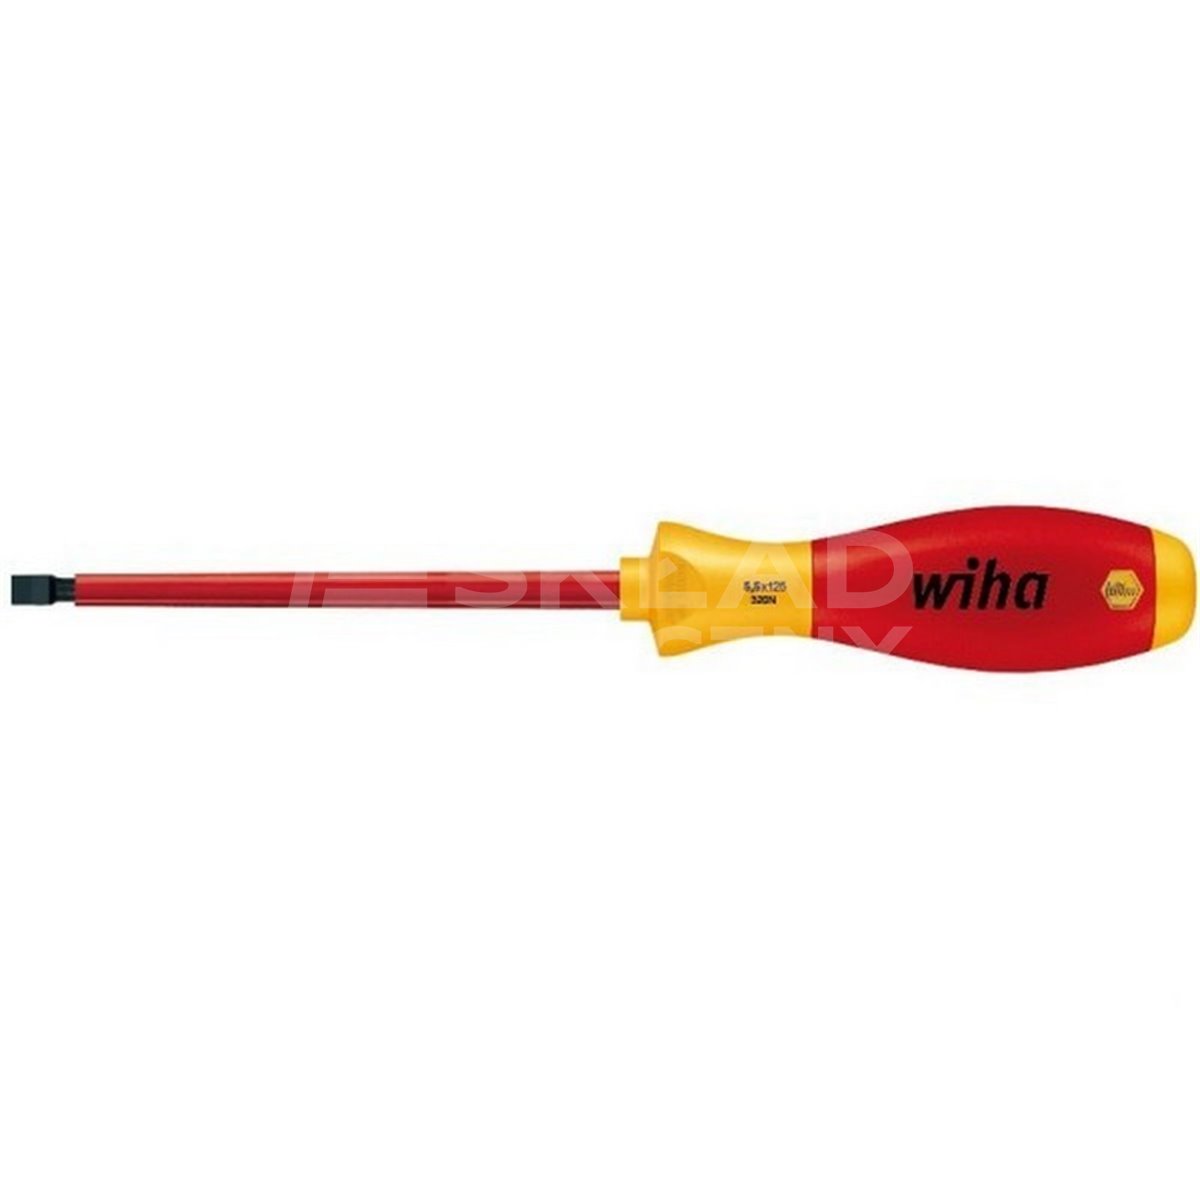 SoftFinish electric VDE 320N 3.5 100mm flat screwdriver by Wiha 00822.